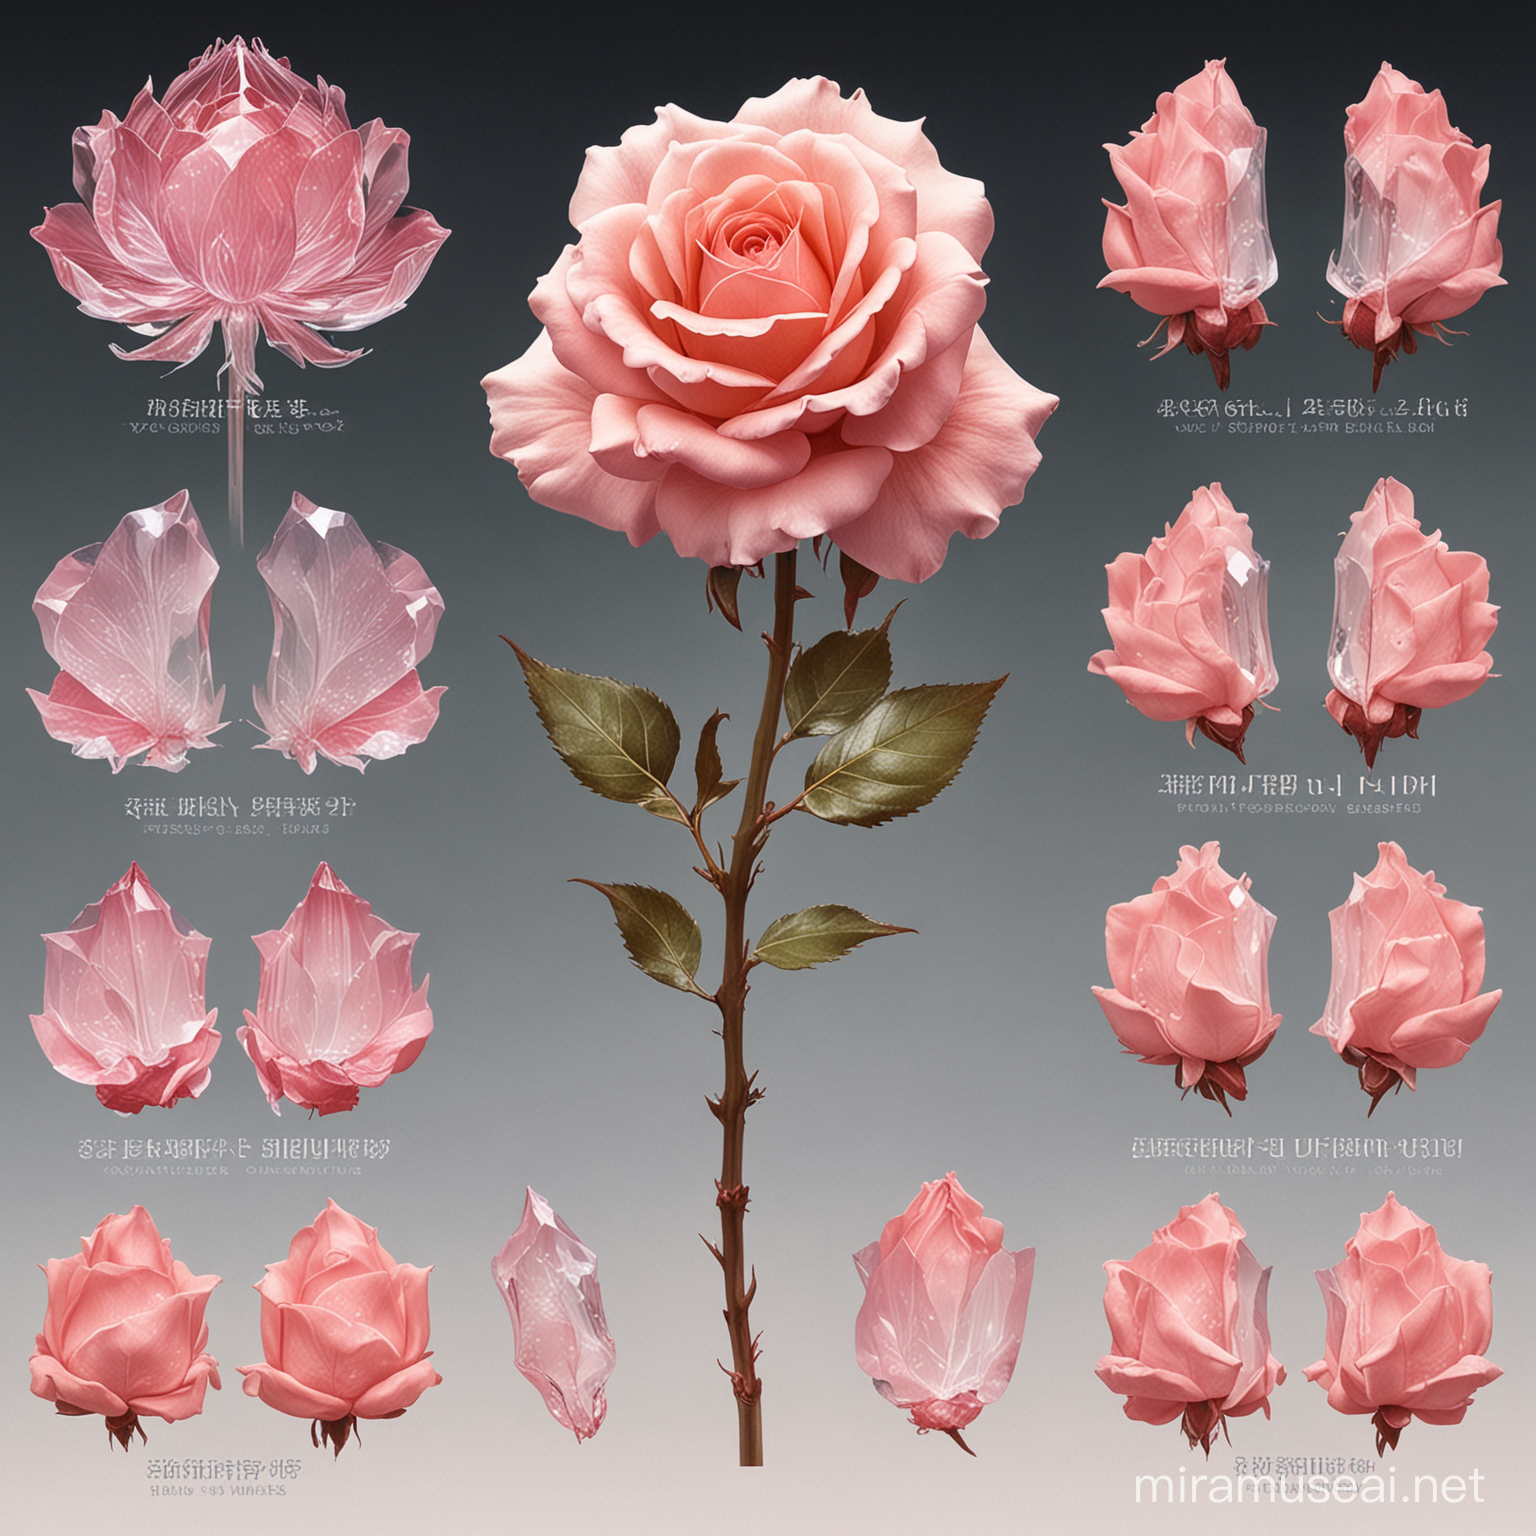 Exquisite Rose Crystal Specimen Infographic Inspired by Final Fantasy 10